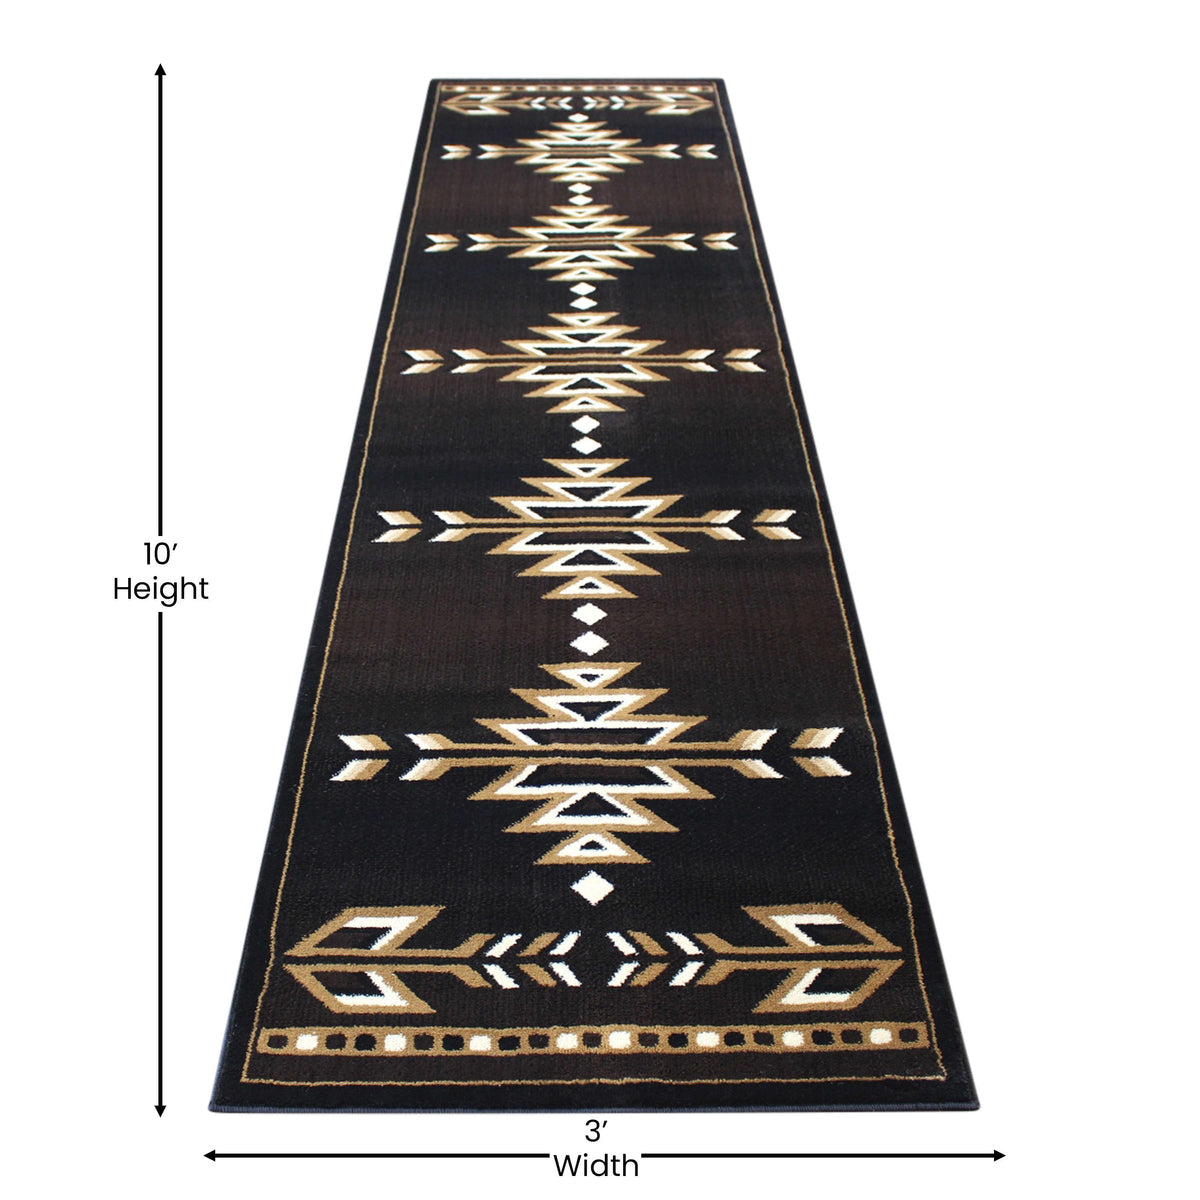 Brown,3' x 10' |#| Southwestern Style Area Rug in Shades of Brown, Beige, and Black - 3' x 10'